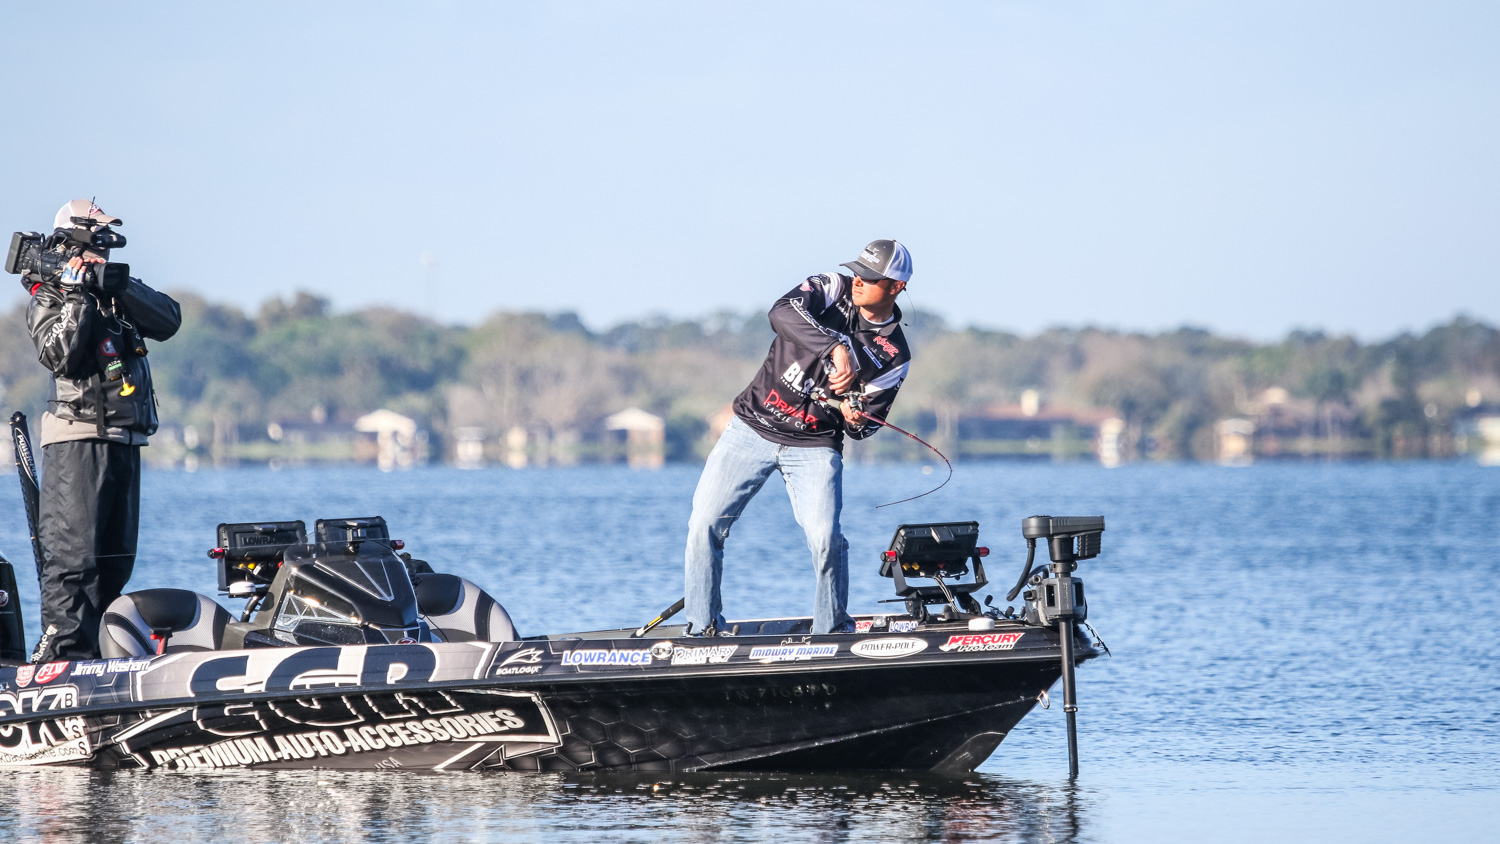 Top 10 Patterns from the Harris Chain - Major League Fishing